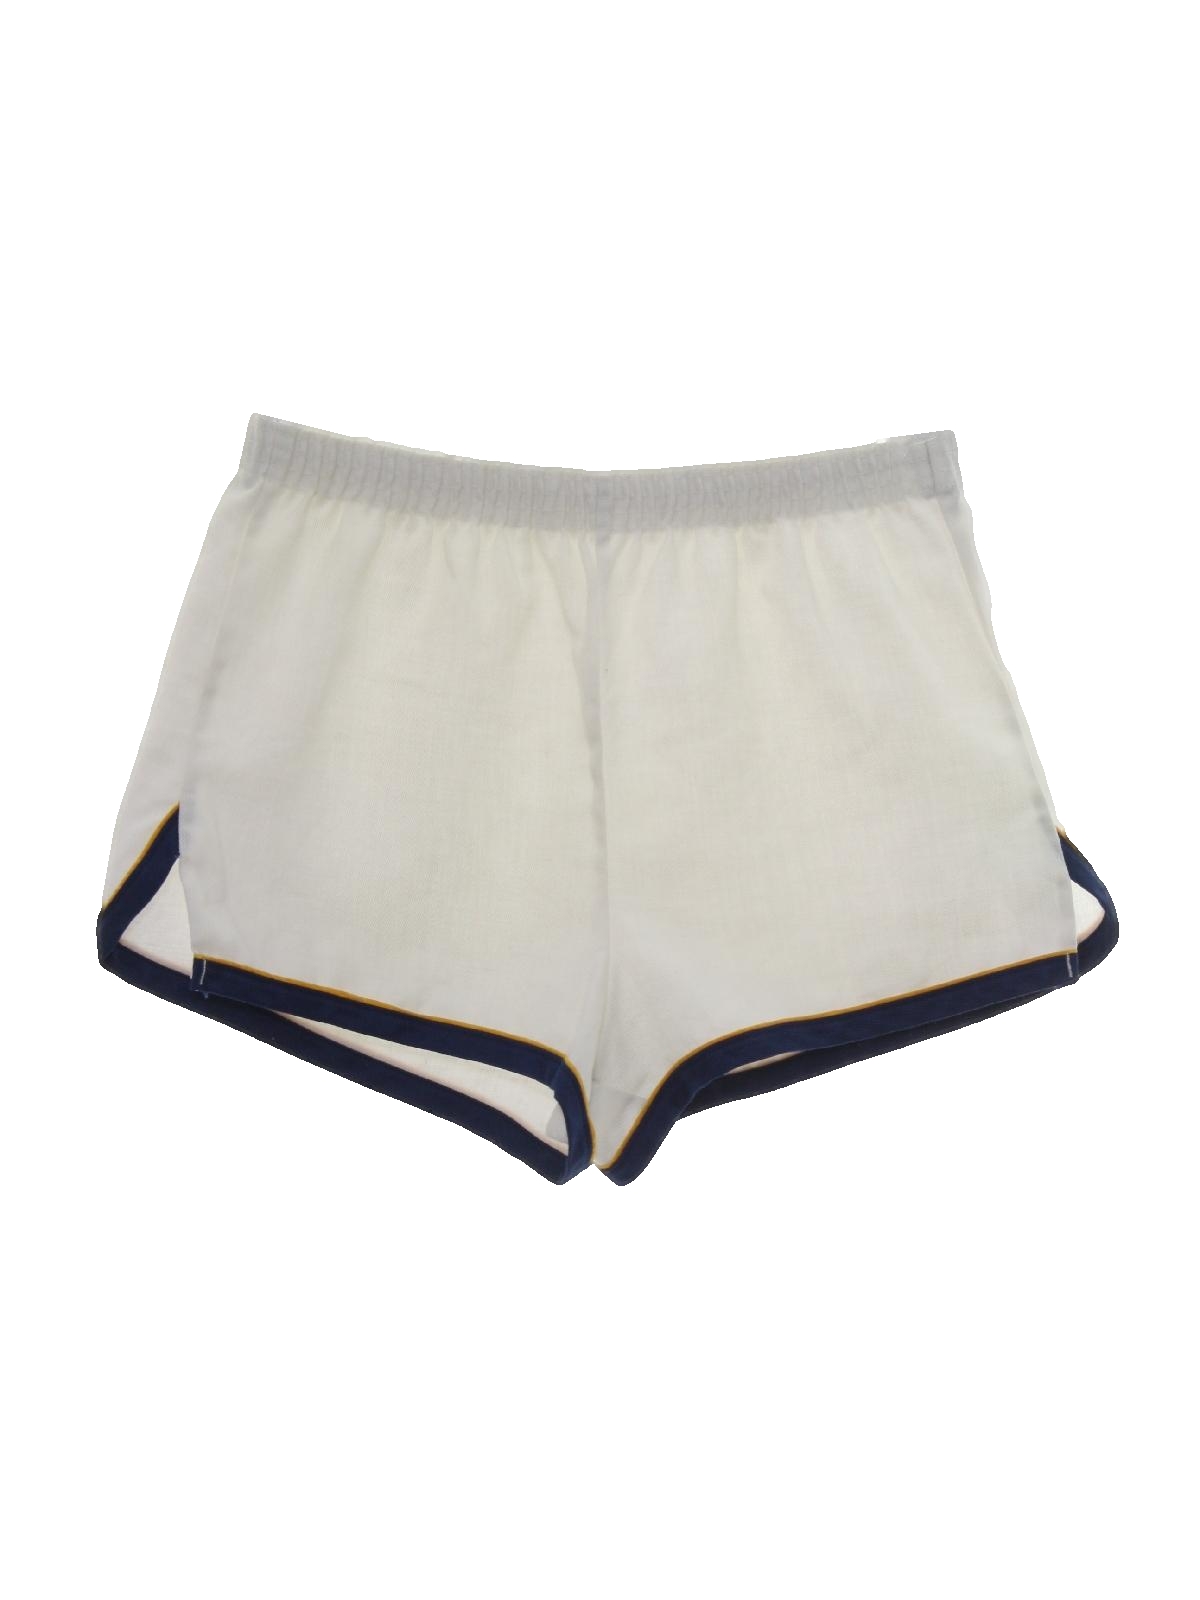 Eighties Vintage Shorts: 80s -Downerwear- Mens white background with ...